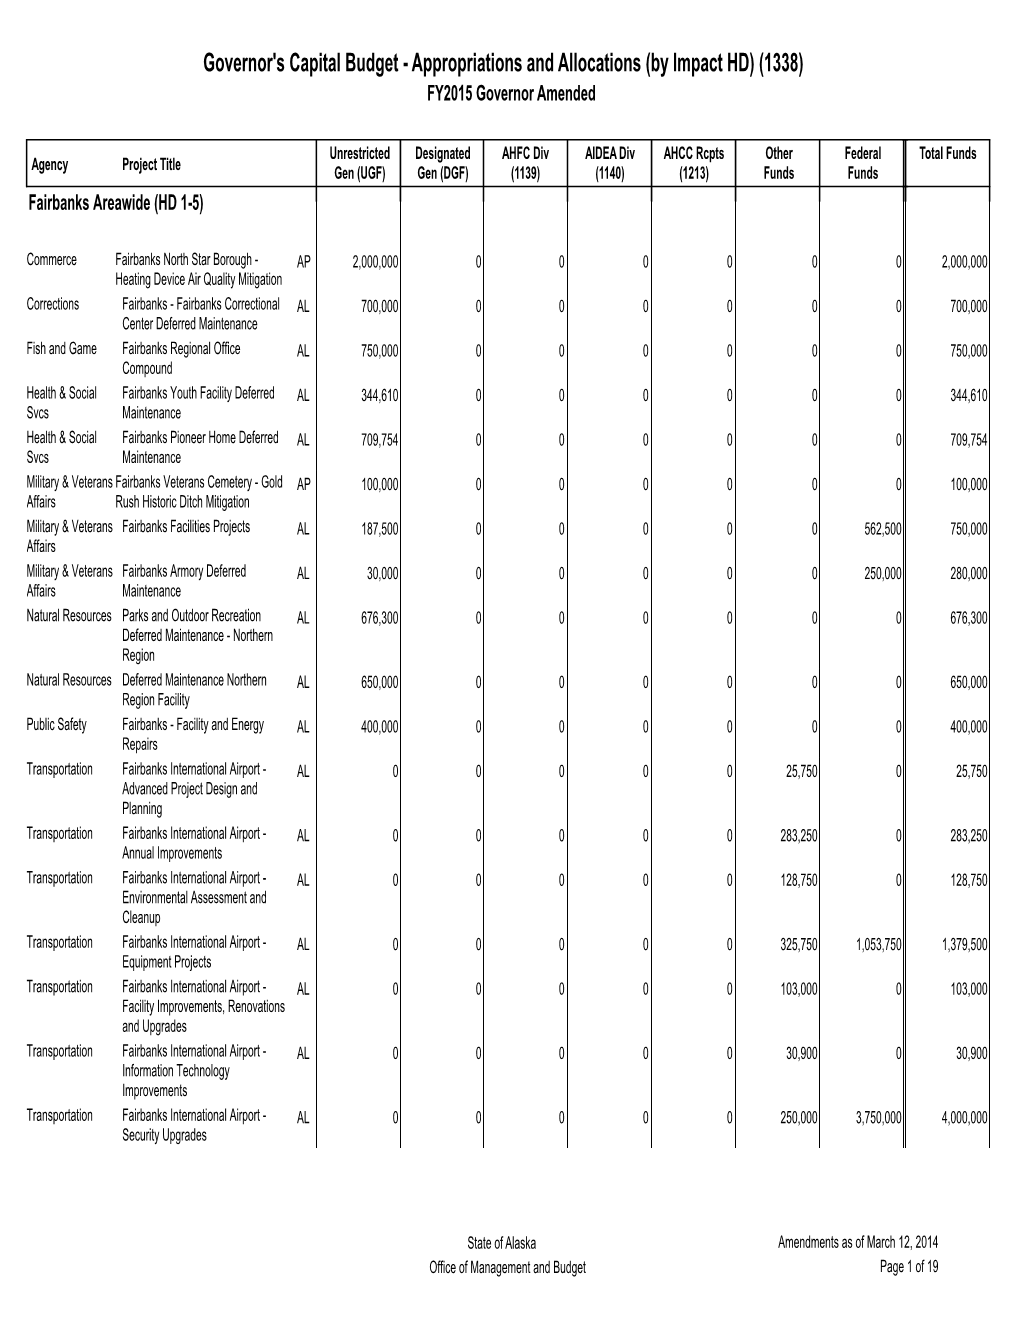 Governor's Capital Budget - Appropriations and Allocations (By Impact HD) (1338) FY2015 Governor Amended